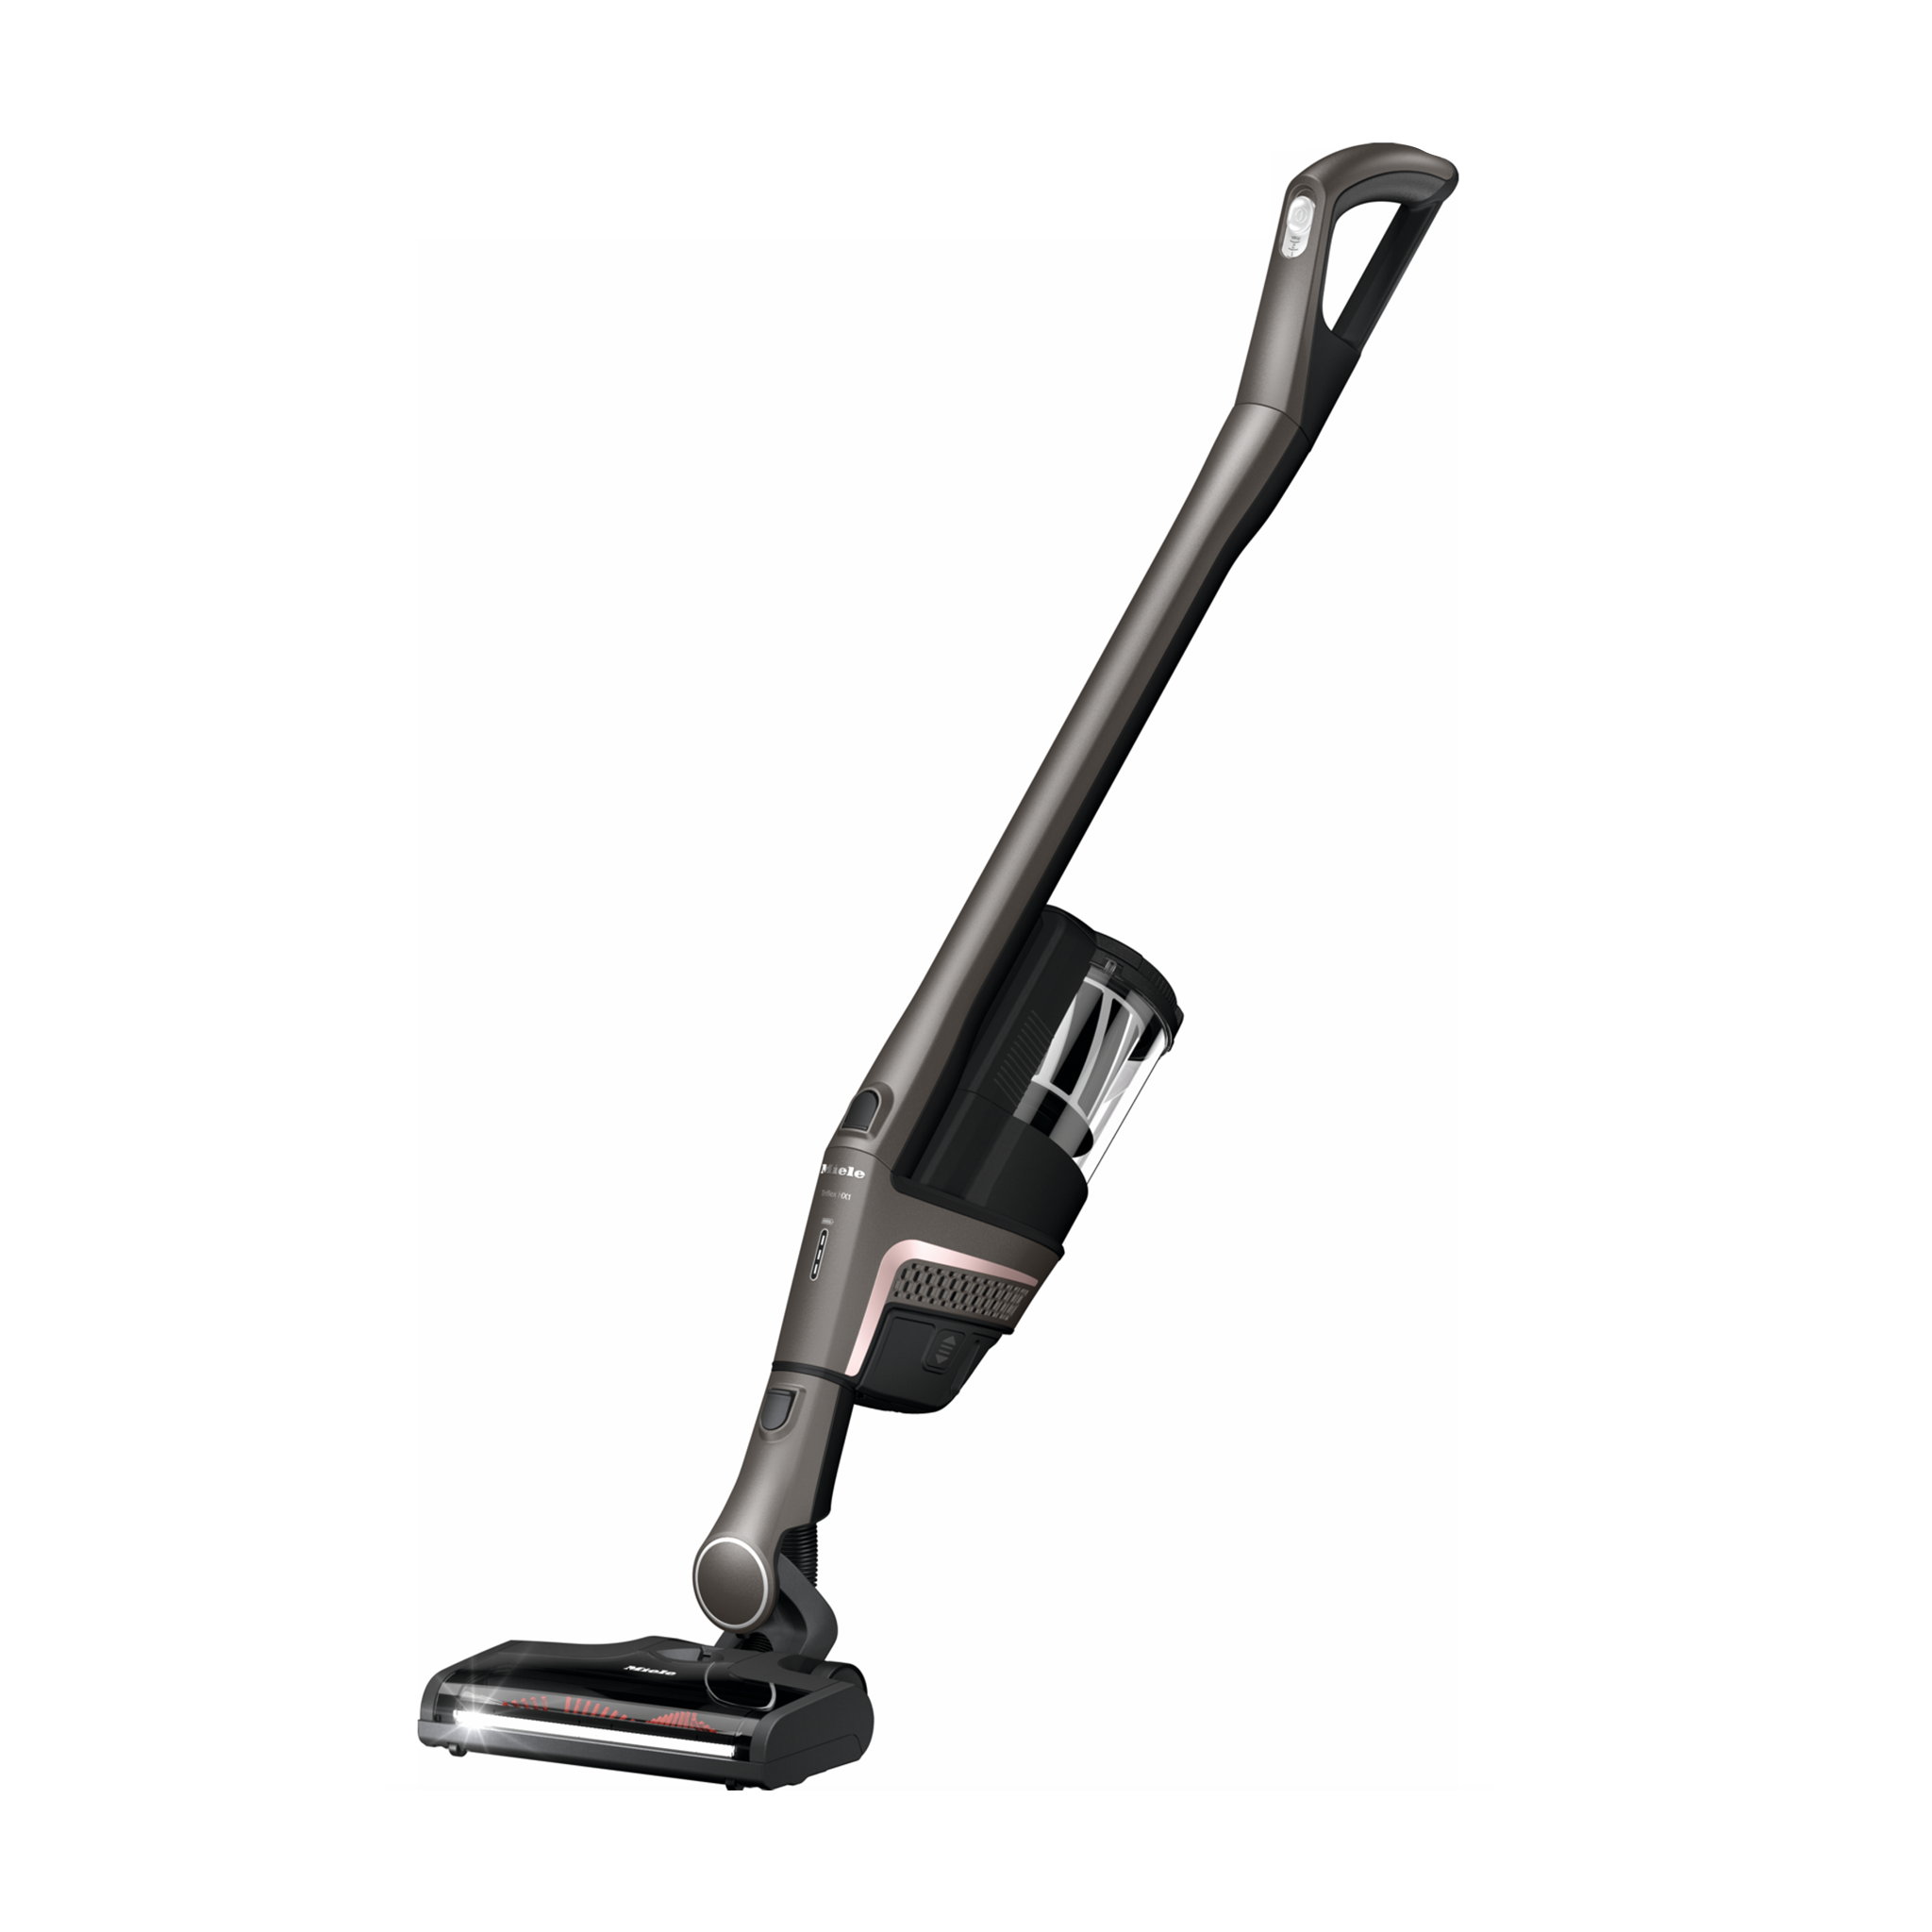 https://www.moores-sew.com/wp-content/uploads/2021/06/Miele_TriFlex_Pro_main_Product_image_vacuum_cleaner.png